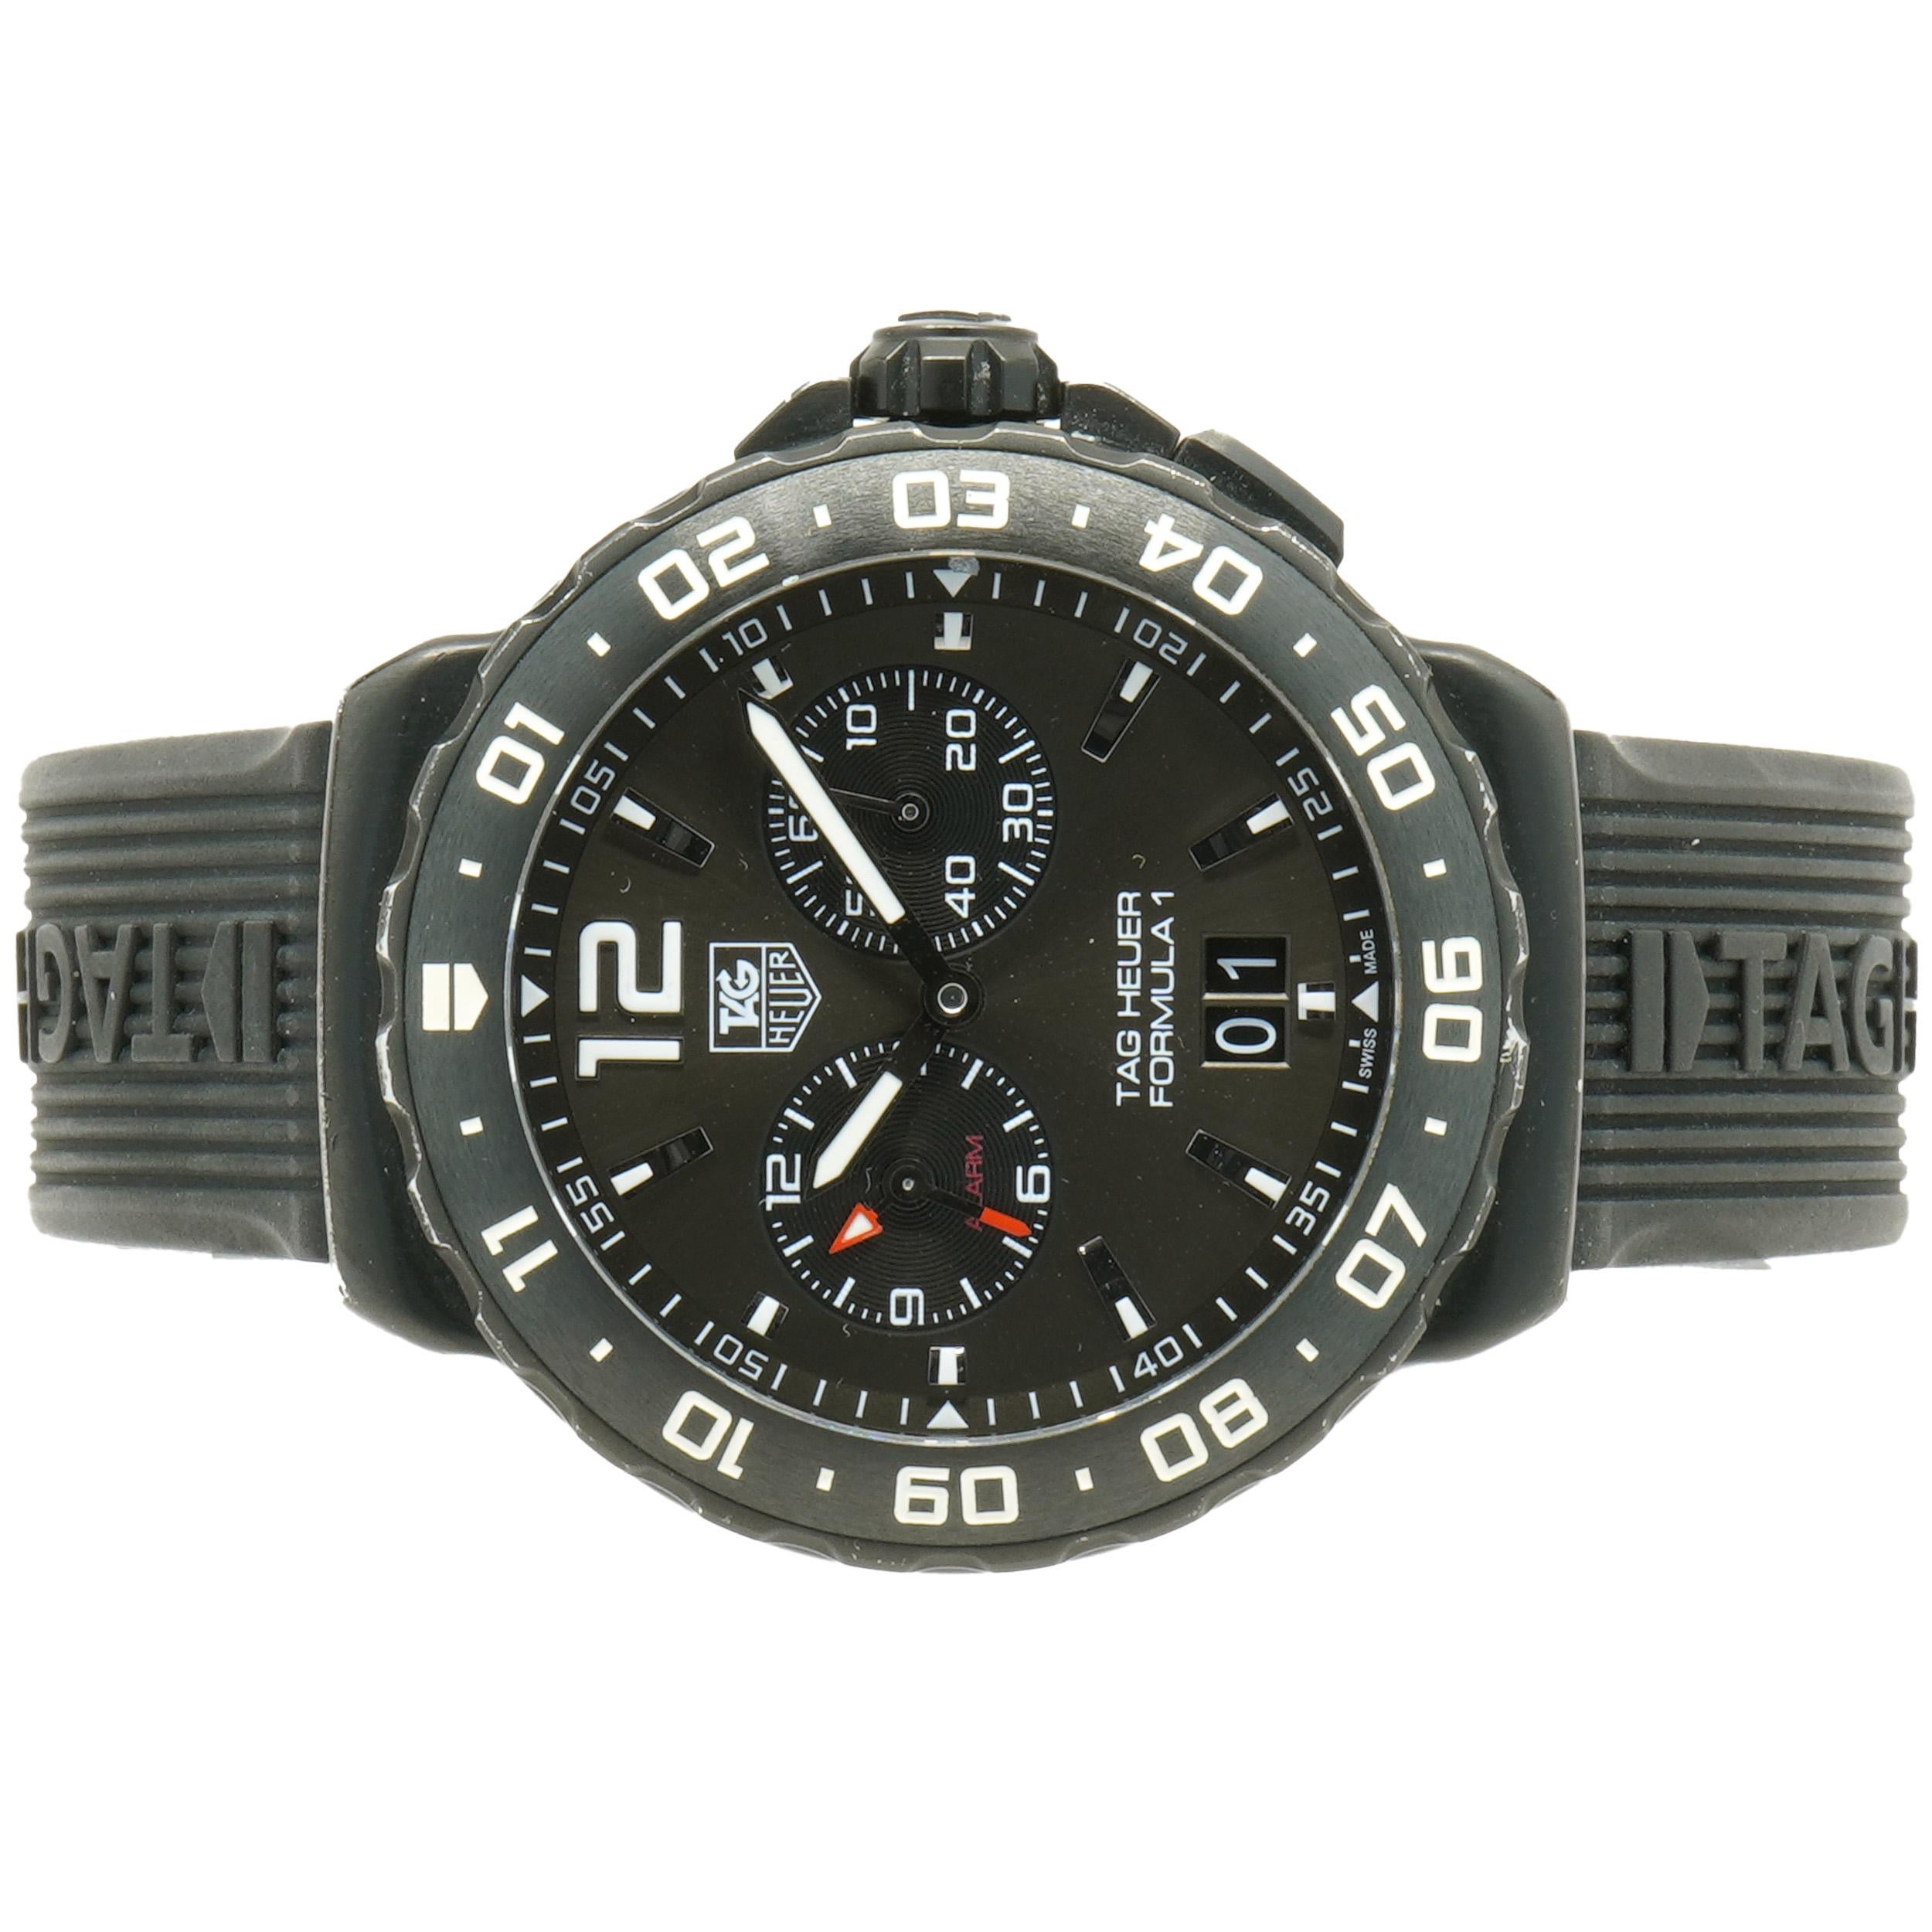 Movement: quartz
Function: hours, minuets, subseconds, date, alarm
Case: 42mm titanium case, 12 hour bezel
Dial: grey
Band: black Tag Heuer rubber
Reference#: WAU111D
Serial#: WRA7XXX

Complete with original box and booklets
Guaranteed authentic by